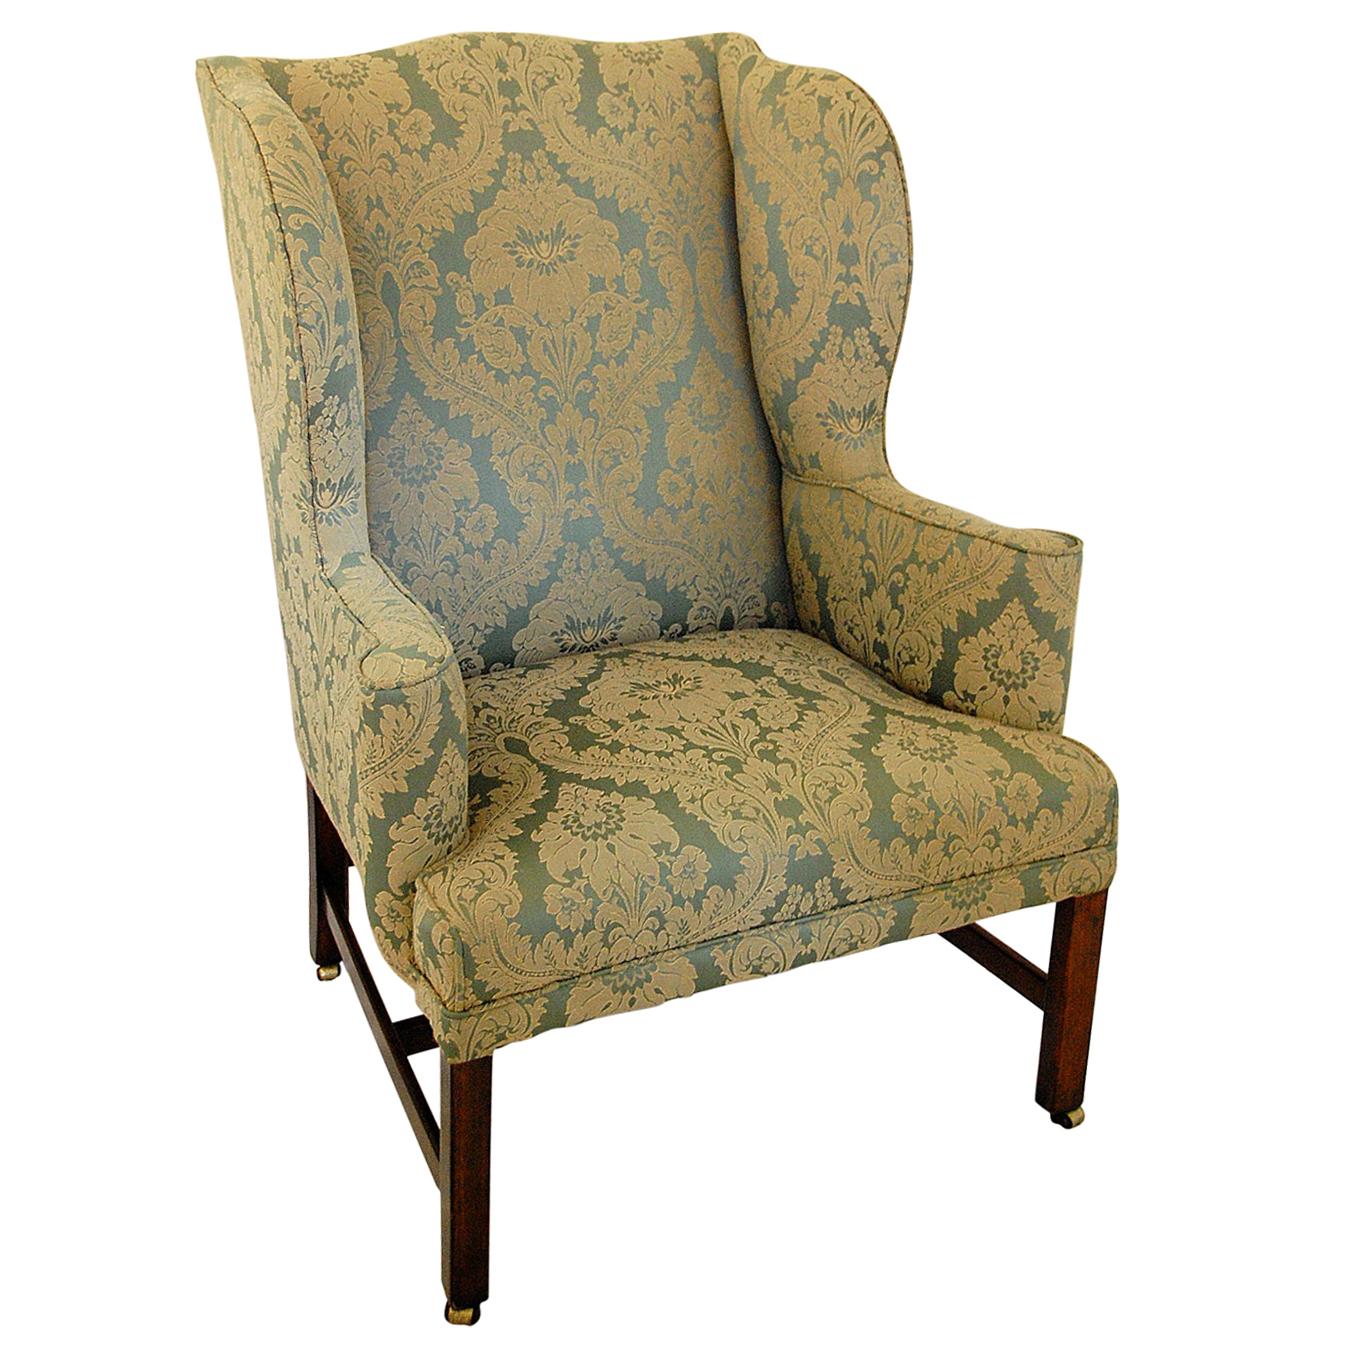 English Georgian Chippendale Mahogany Period Wing Chair